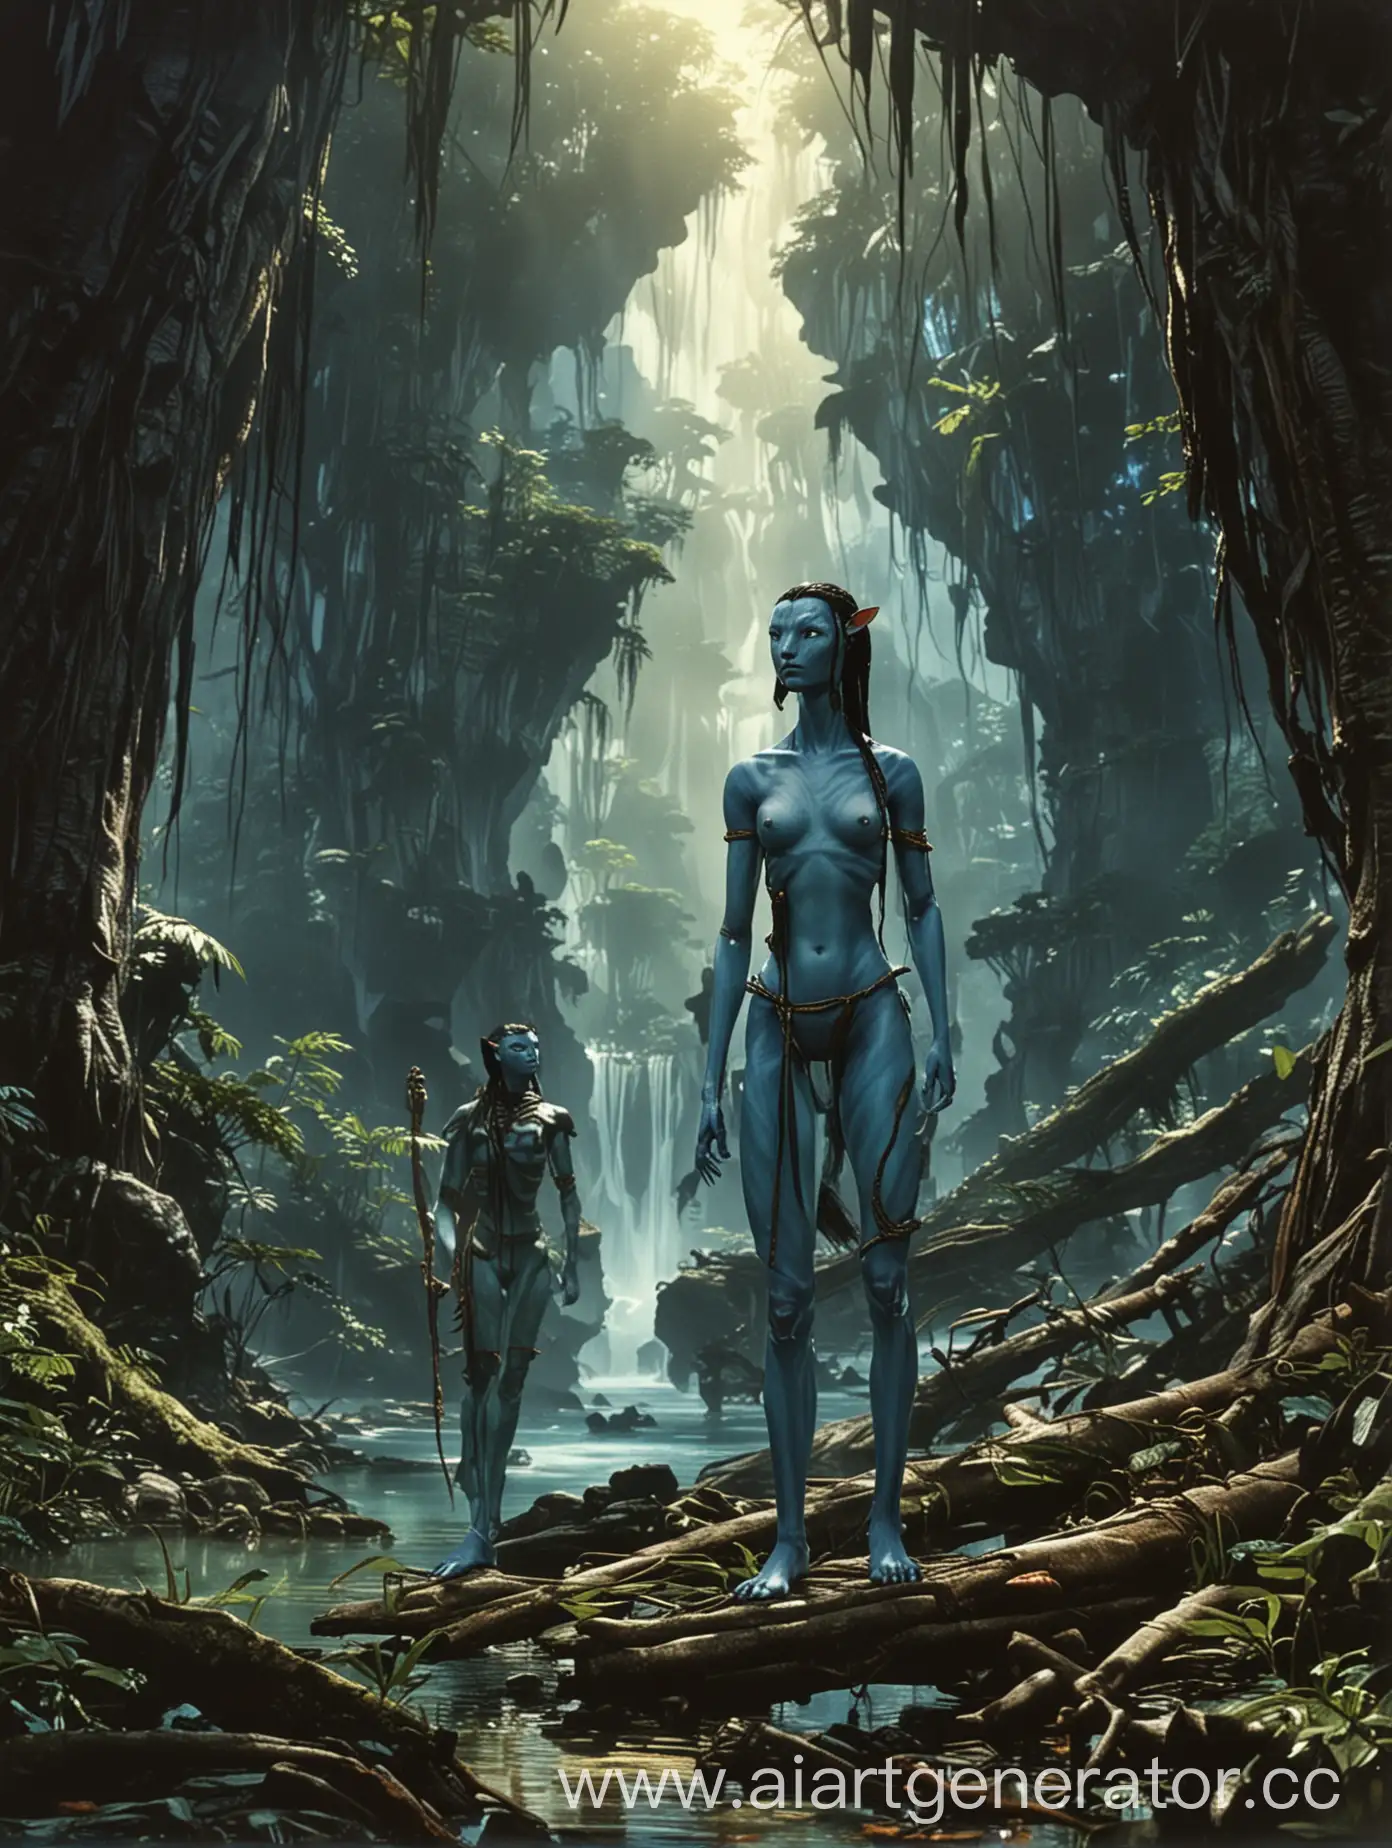 Mystical-Forest-Encounter-Frame-from-the-1960-Film-Avatar